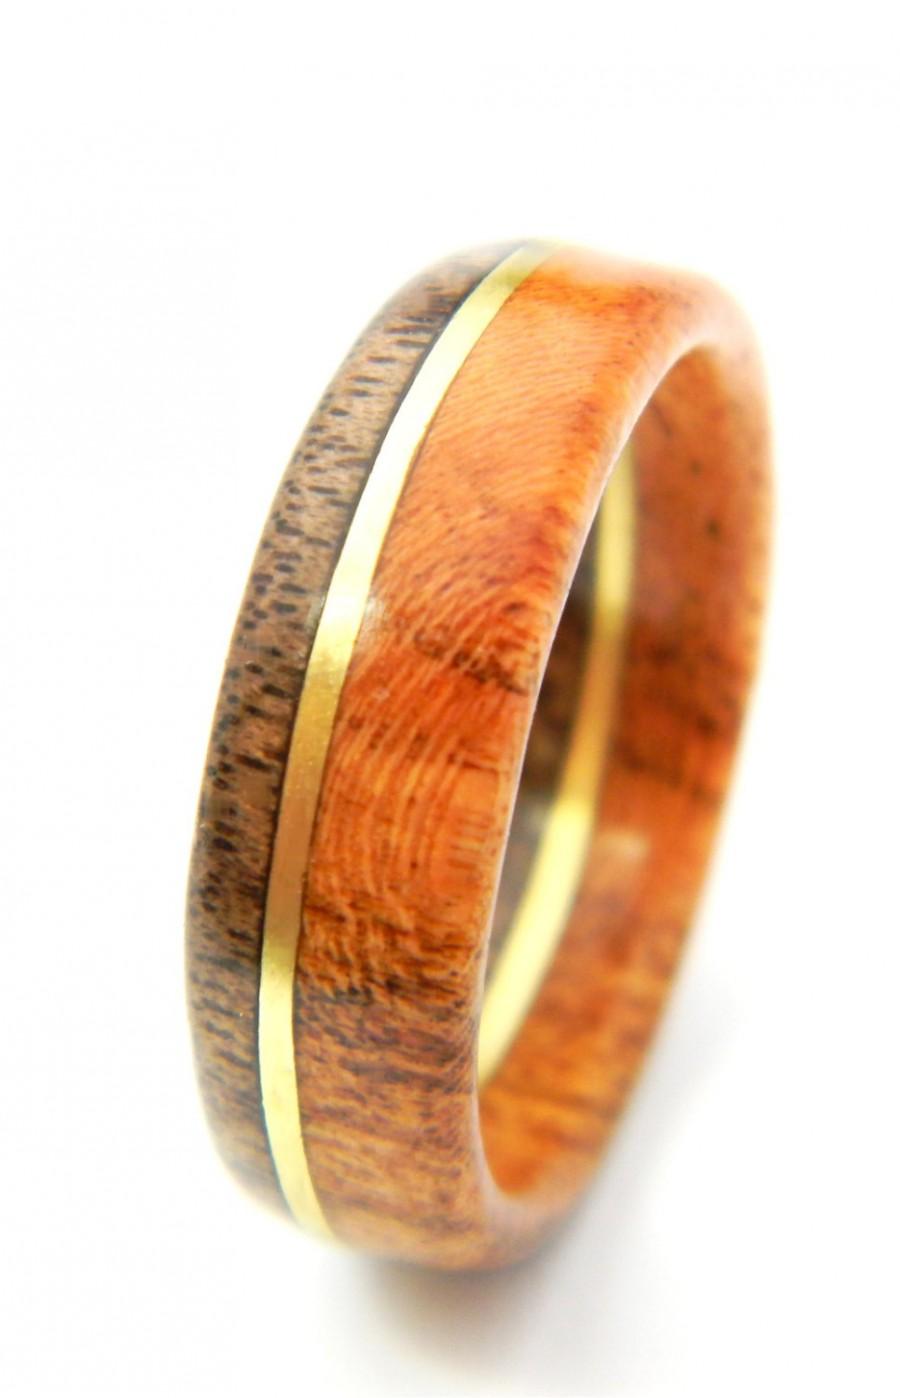 Mariage - Unique Walnut and Cherry Wood Ring, Jewelry, Ring, Wood Jewelry, Weddings, Wedding Band, Engagement Ring, Spring, Him, Men, Gift, Mens Gift